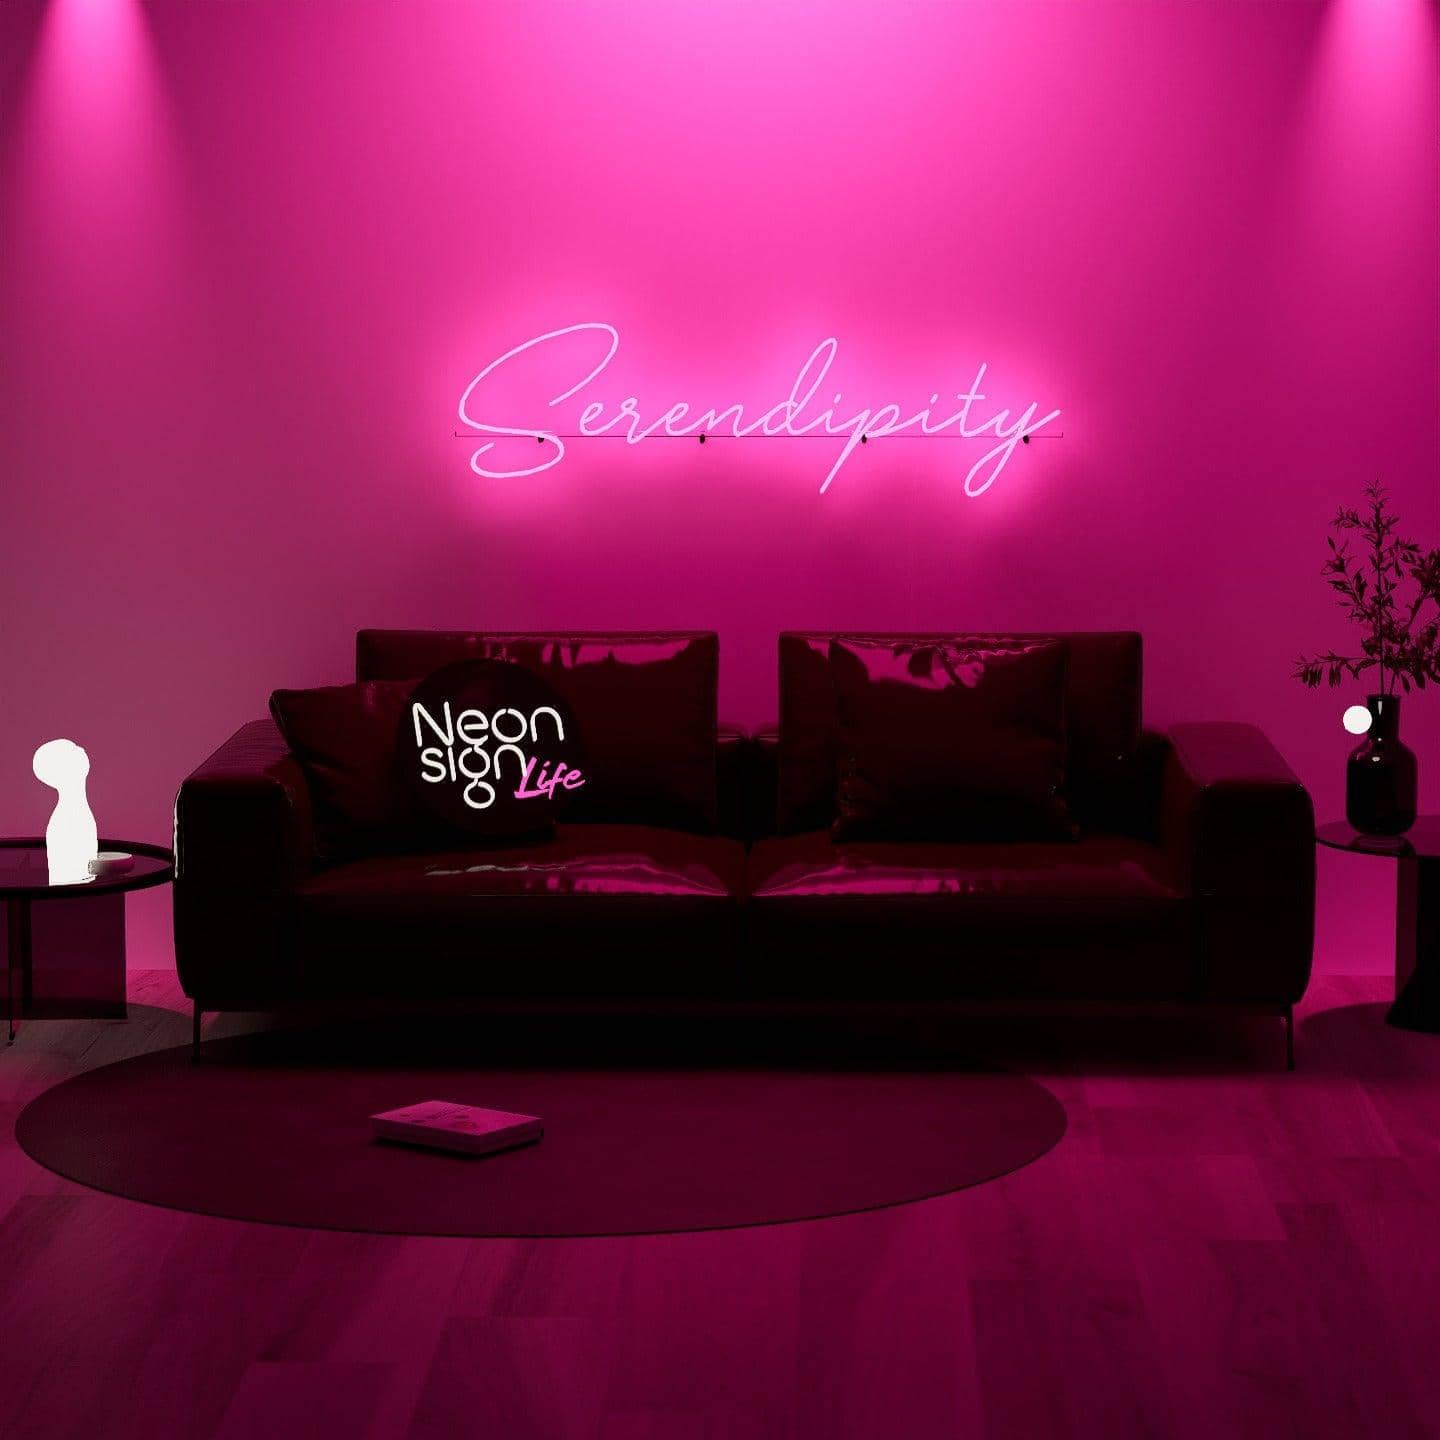 dark-night-lit-pink-neon-lights-hanging-on-the-wall-for-display-srendipity